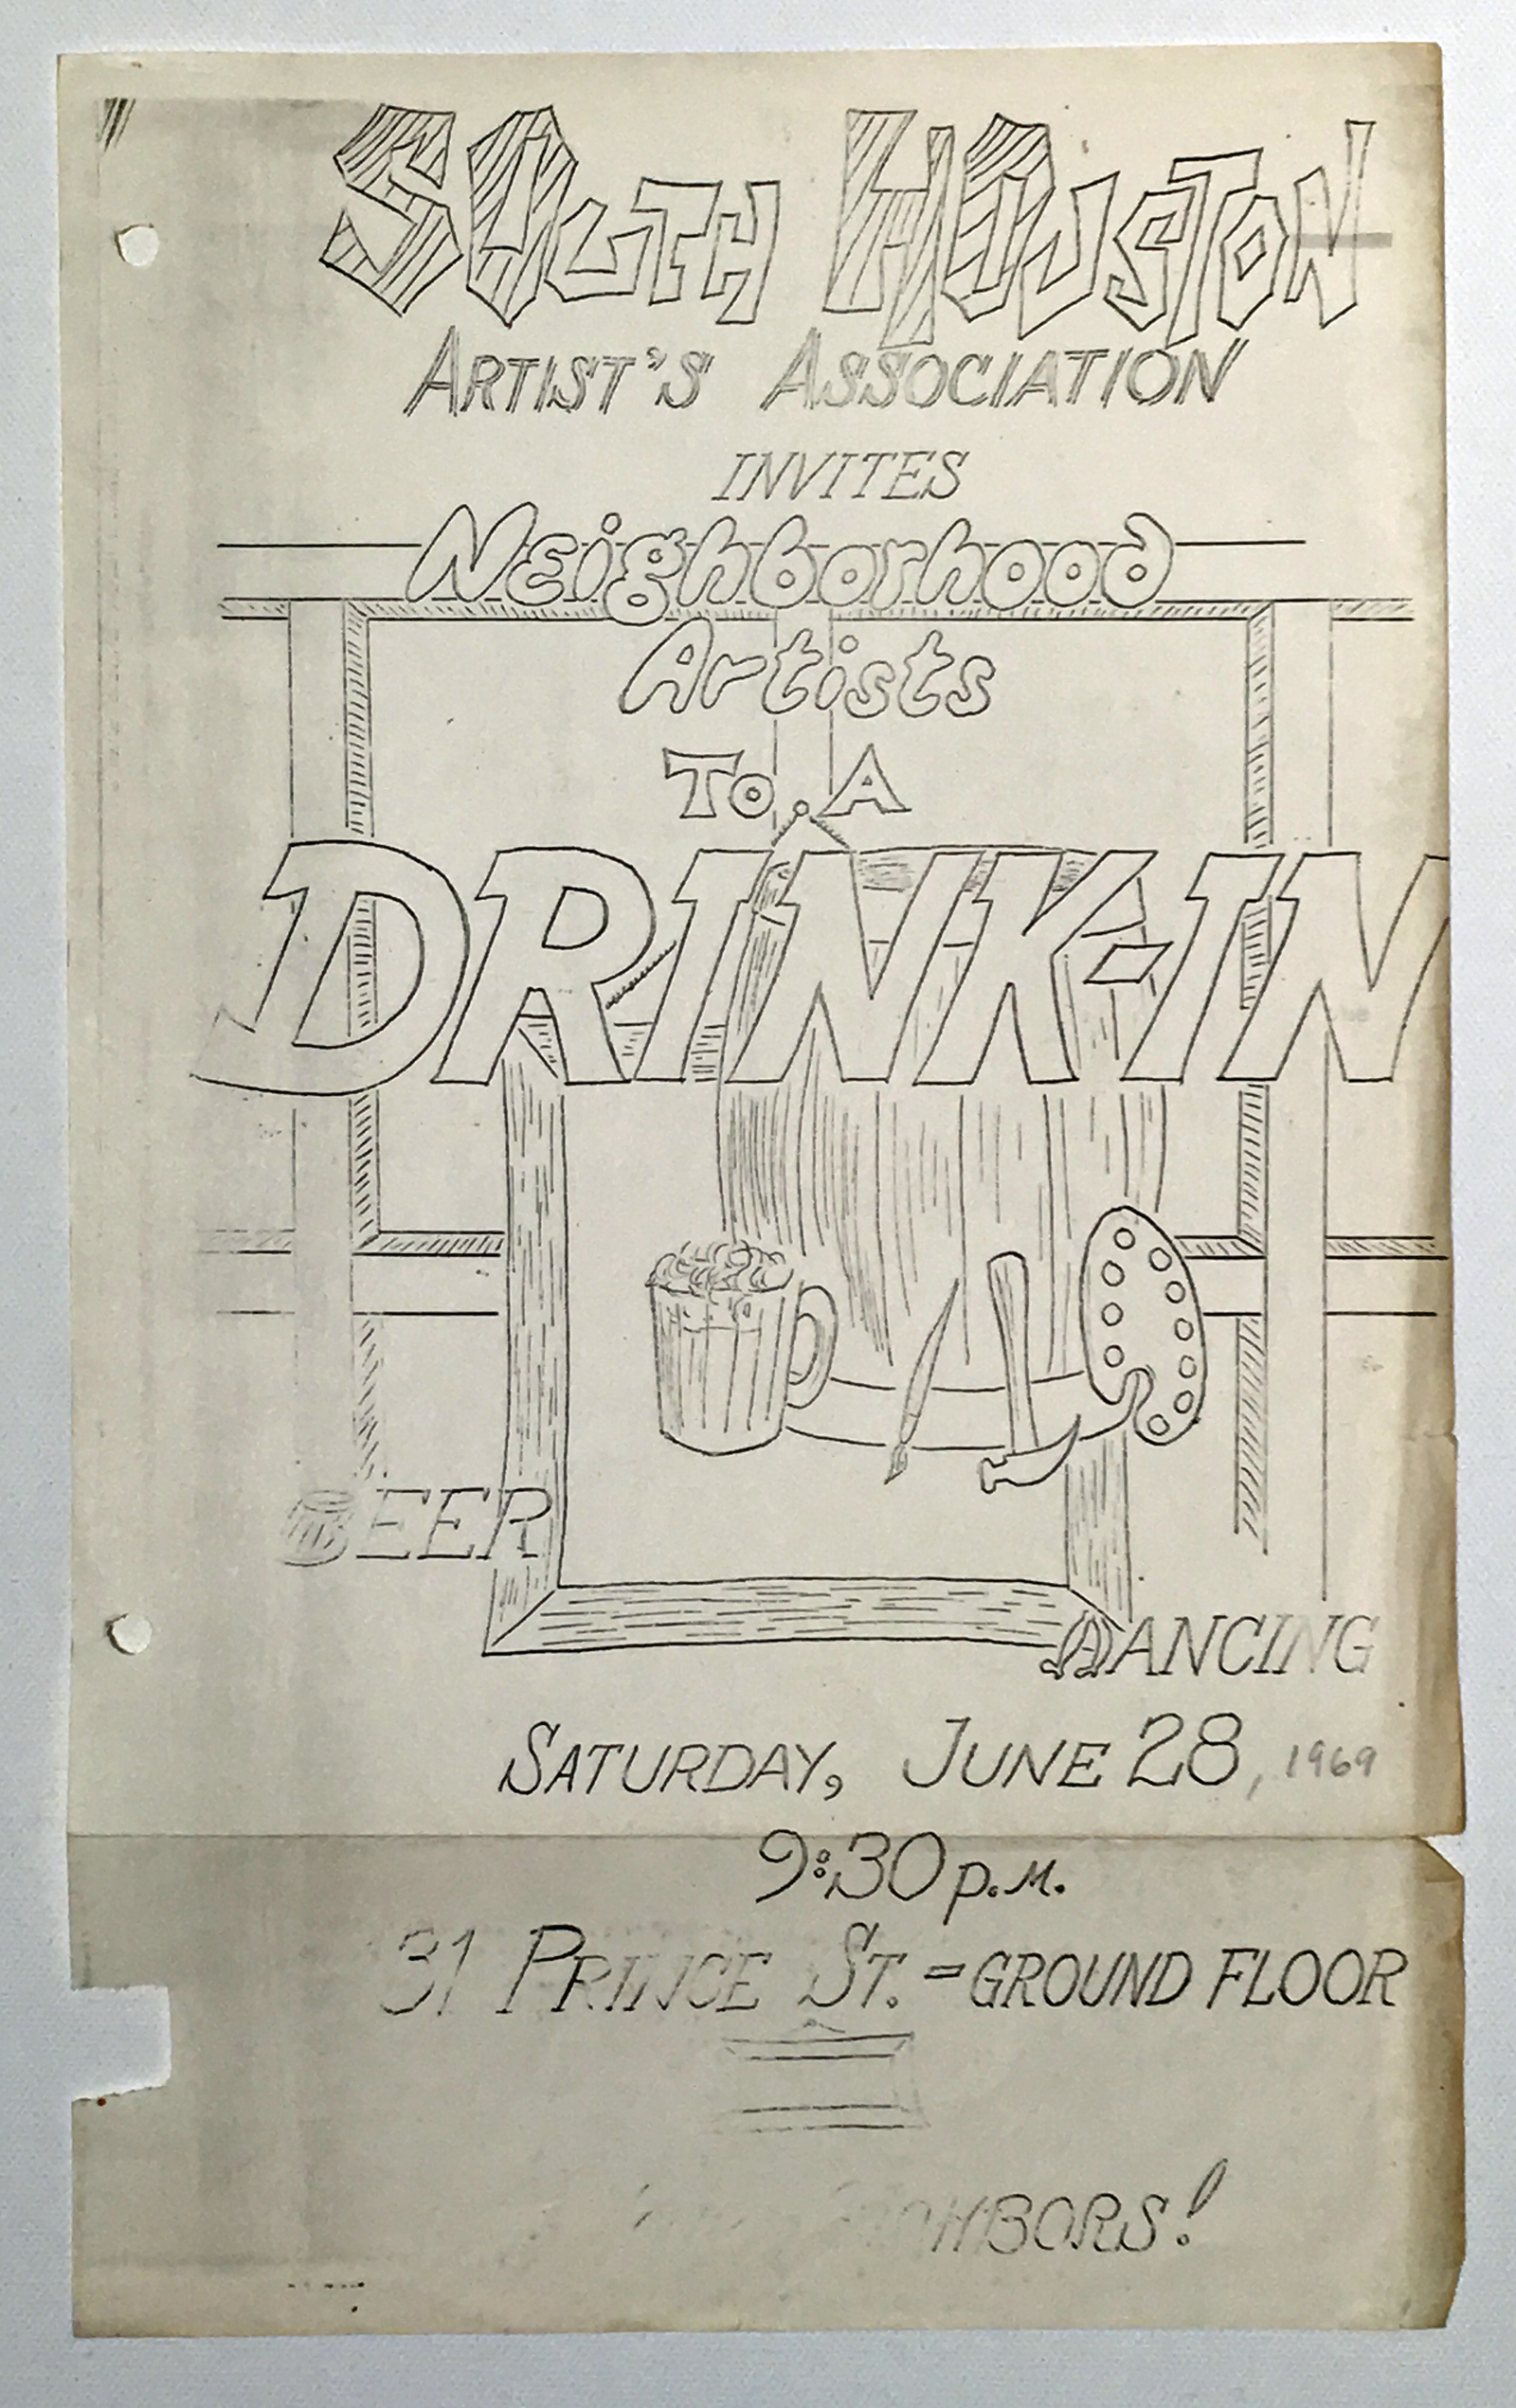 South Houston Artists Association Drink-In 1969